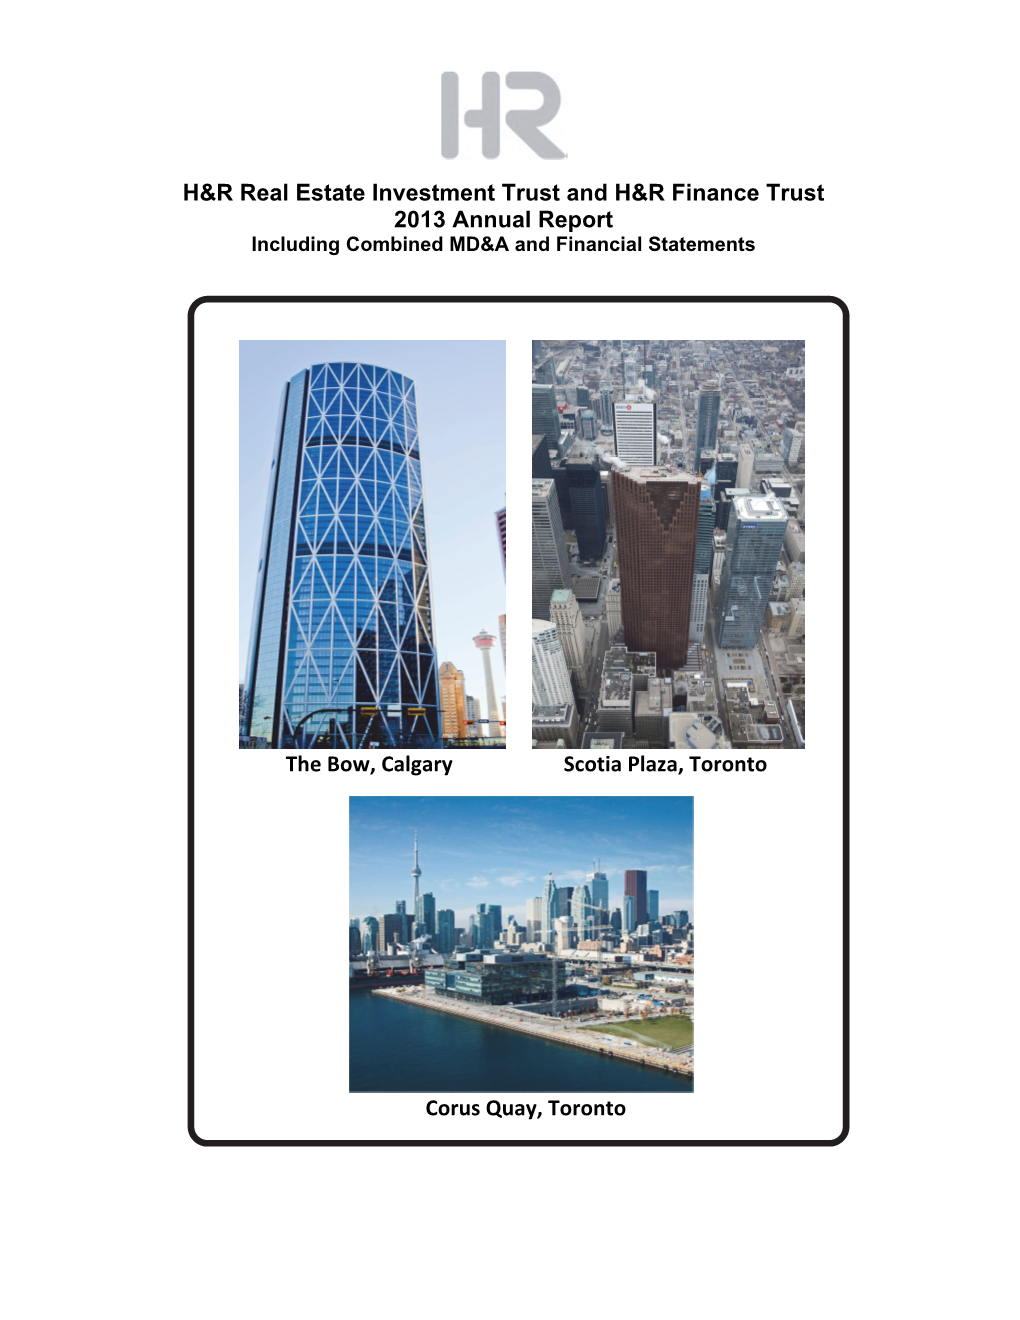 H&R Real Estate Investment Trust and H&R Finance Trust 2013 Annual